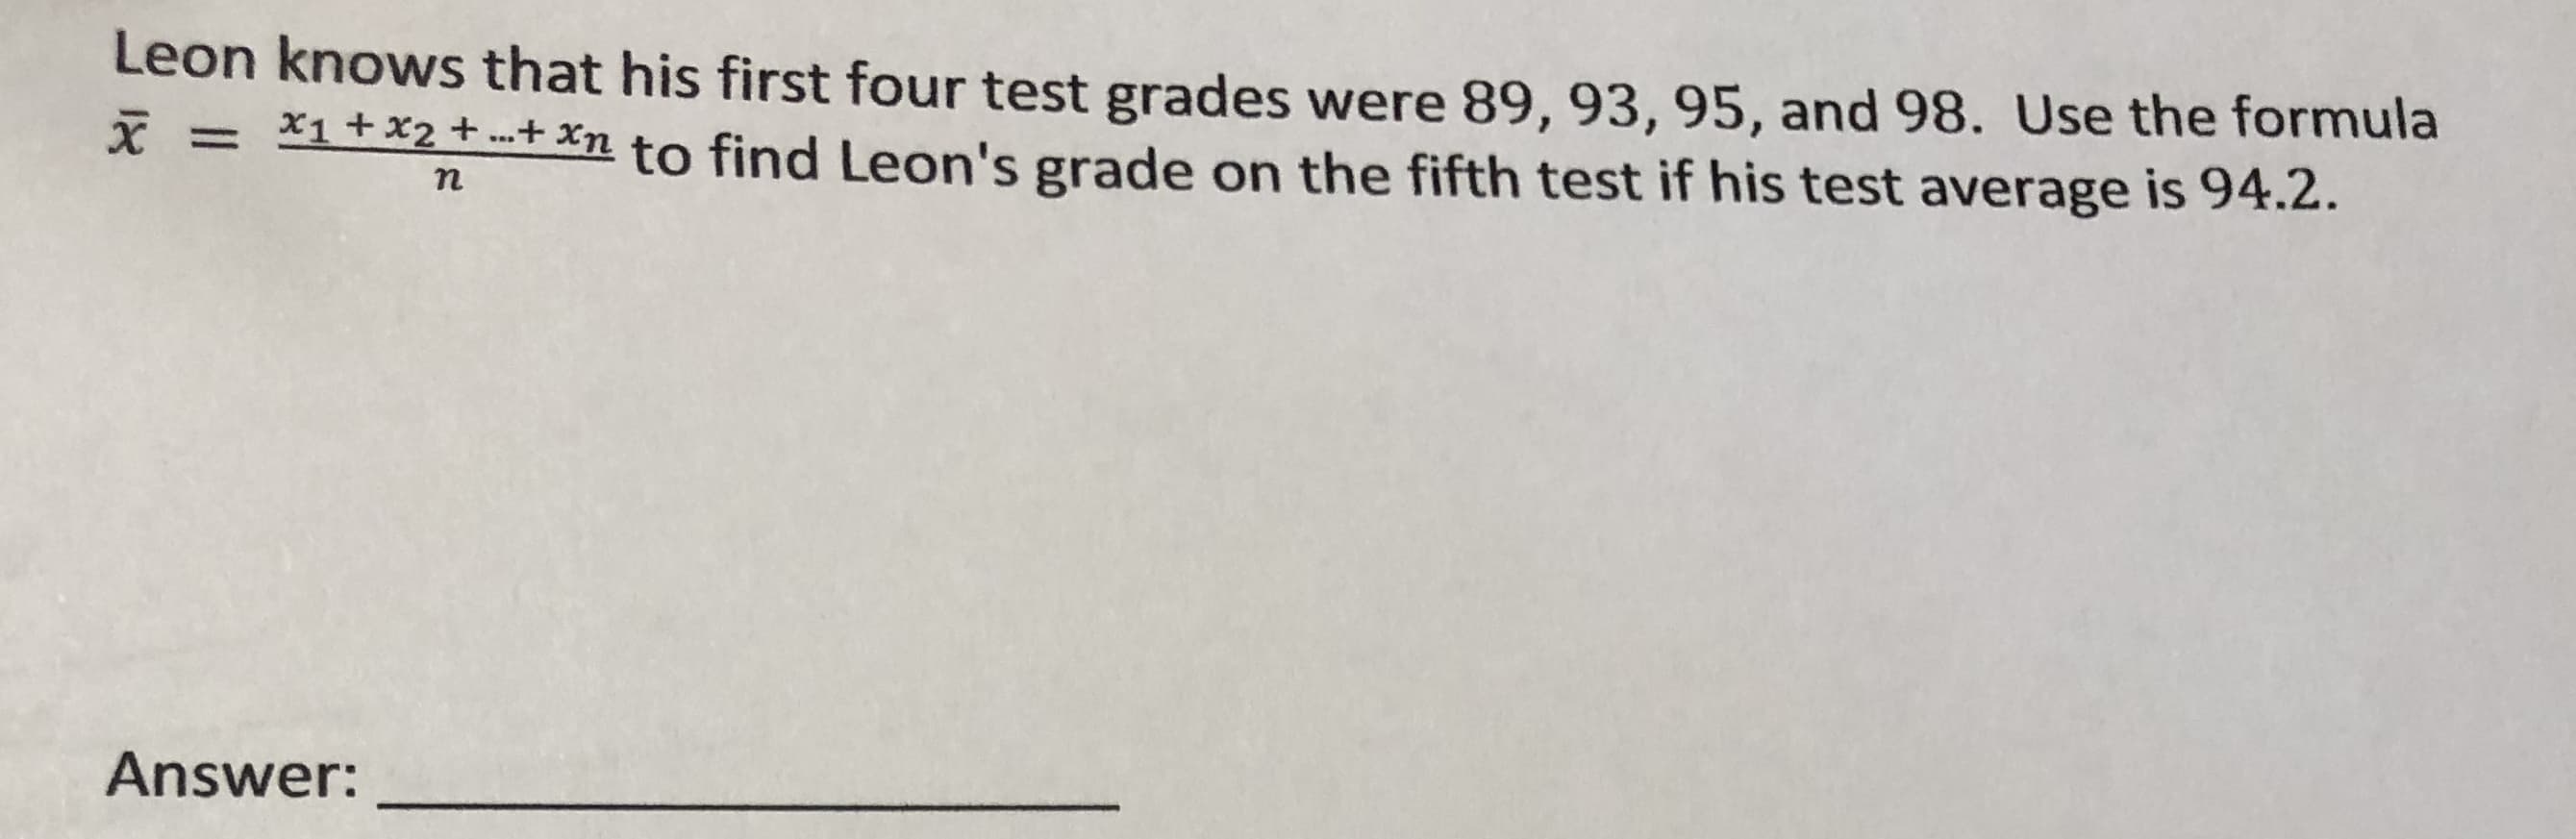 Leon knows that his first four test grades were 89, 93, 95, and 98. Use the formula
X = X1+x2+ .+ Xn to find Leon's grade on the fifth test if his test average is 94.2.
Answer:
